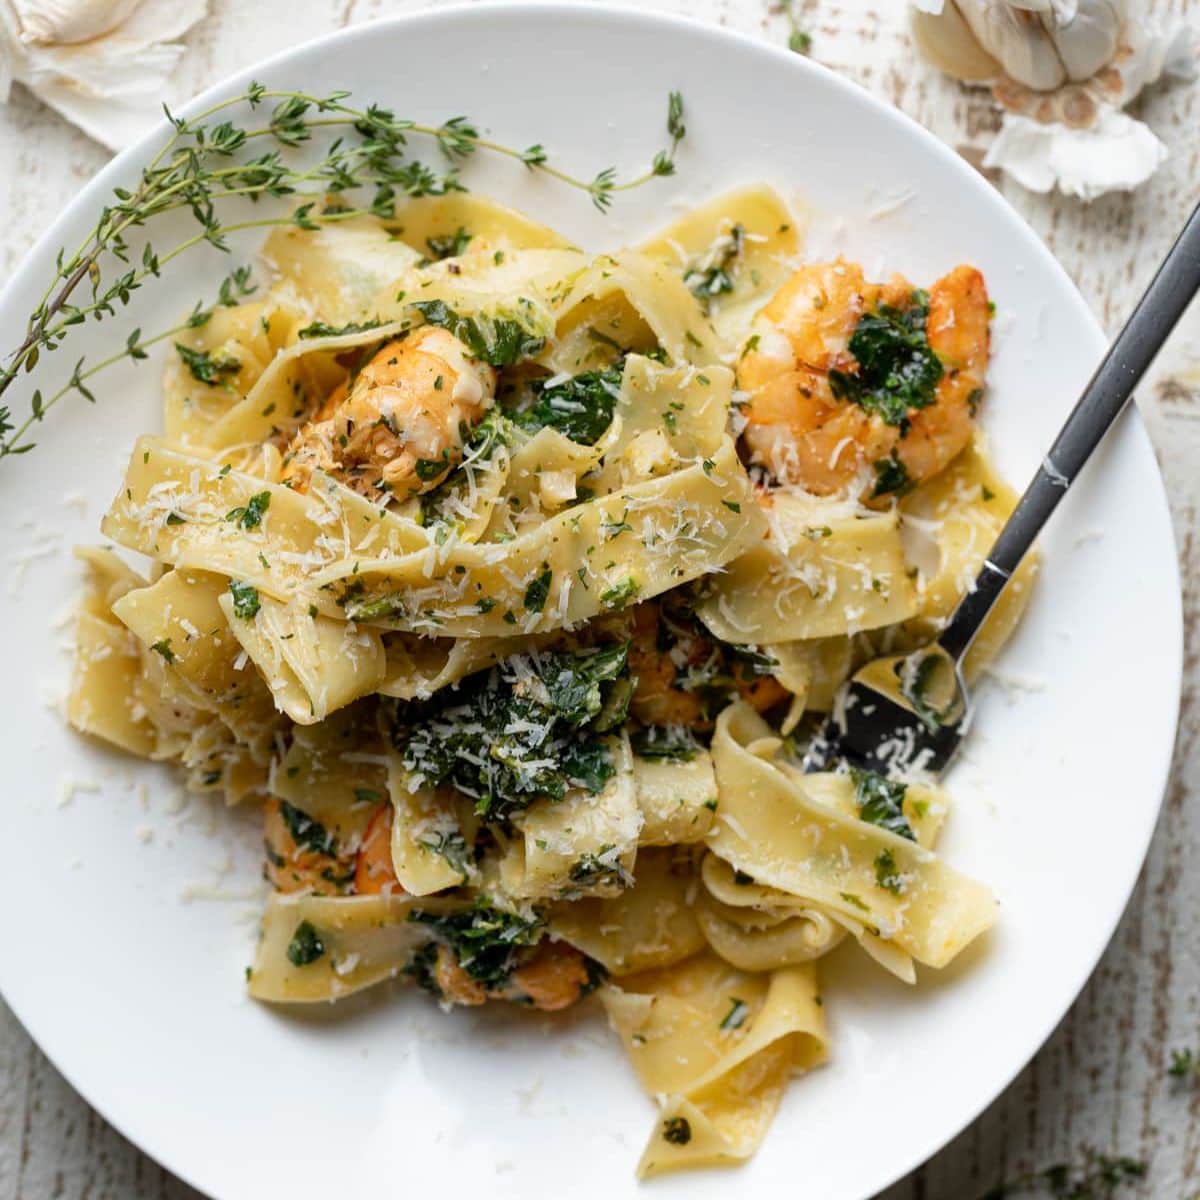 Shrimp pasta on a white plate with herbs and a fork.